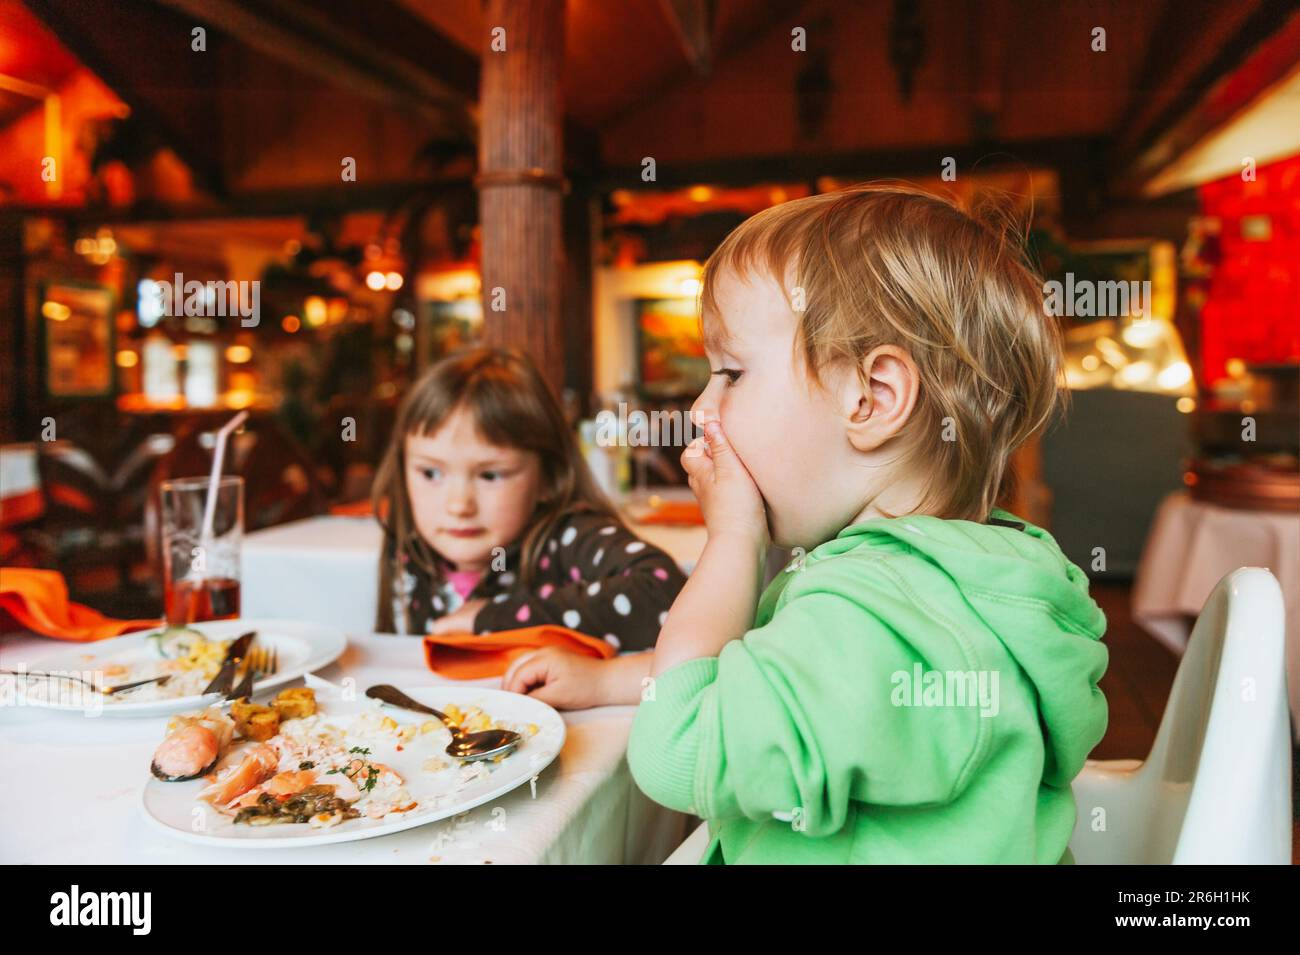 Two messy kids eating lunch in restaurant, toddler eating food with hands Stock Photo